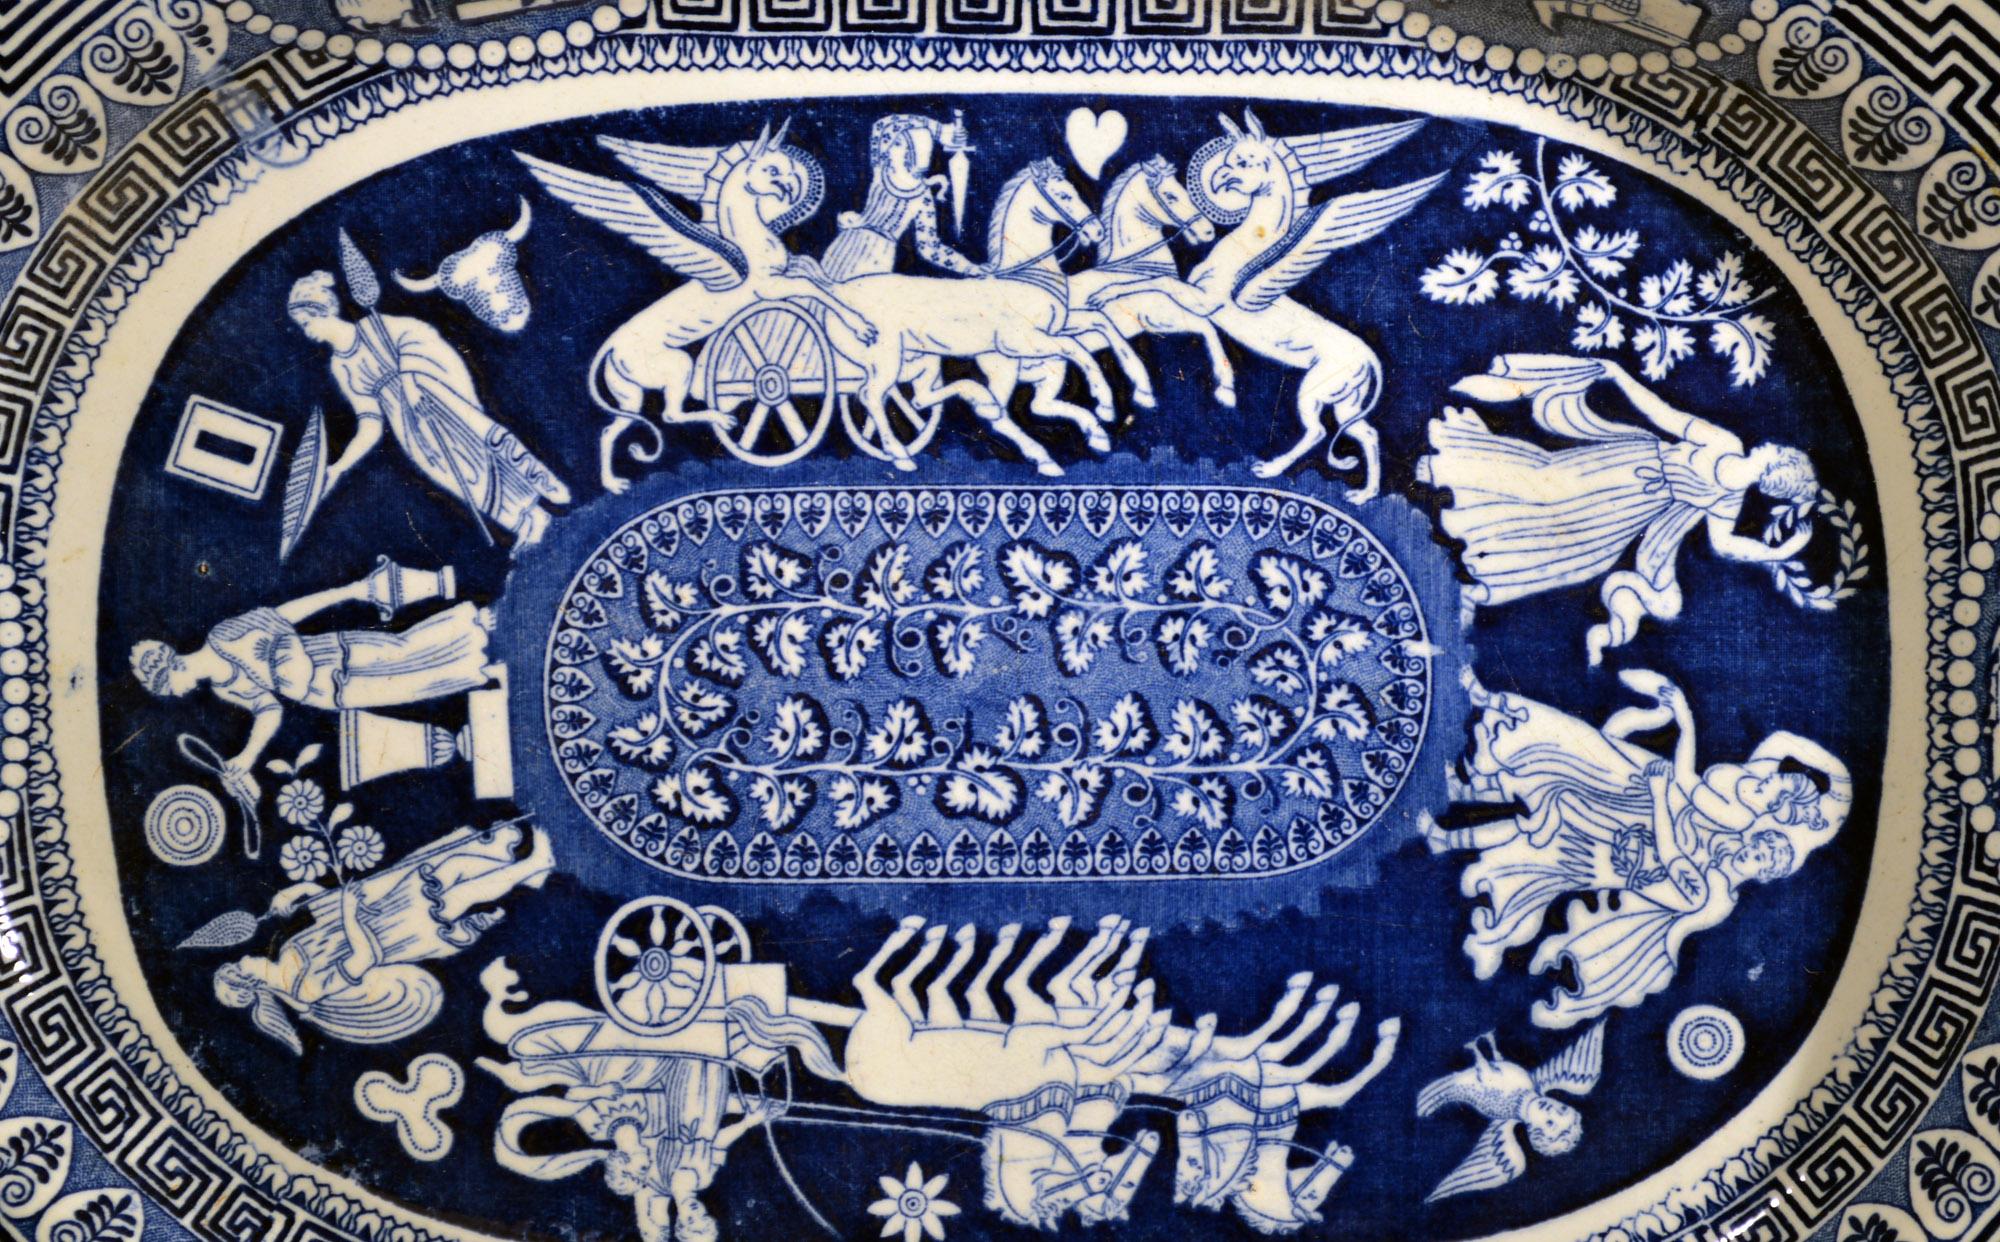 Herculaneum Neo-classical large Greek pattern blue printed dish,
Early-19th century

The Herculaneum pottery underglaze blue central pattern shows aseries of images encicling an oval panel with a leafy vine. There are two main images, one with